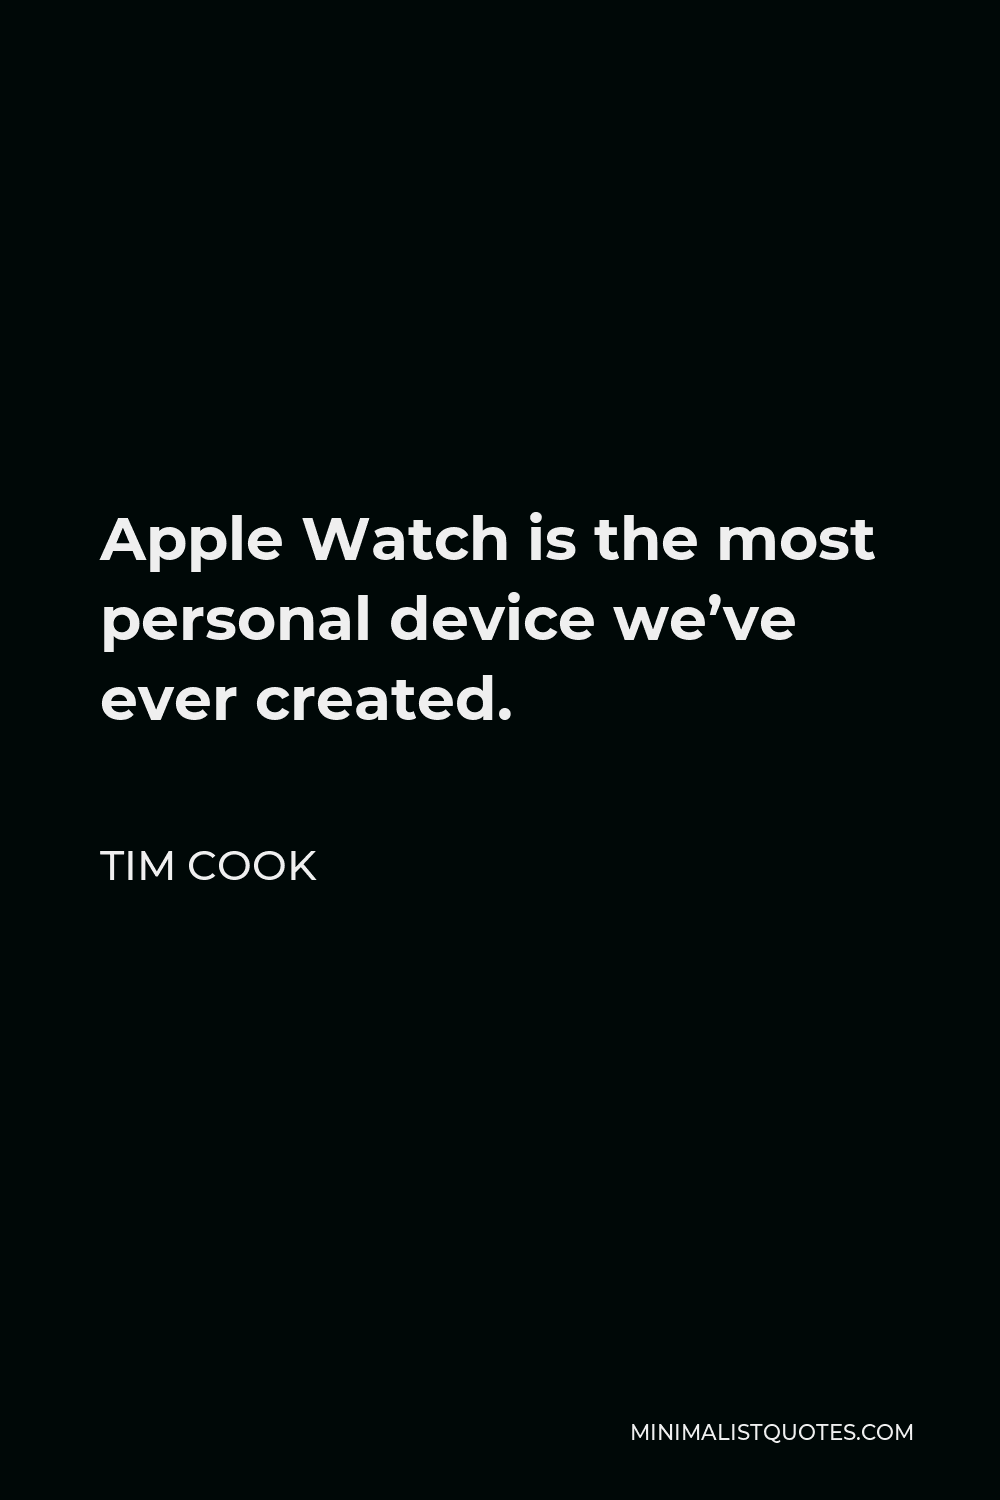 Tim Cook Quote - Apple Watch is the most personal device we’ve ever created.